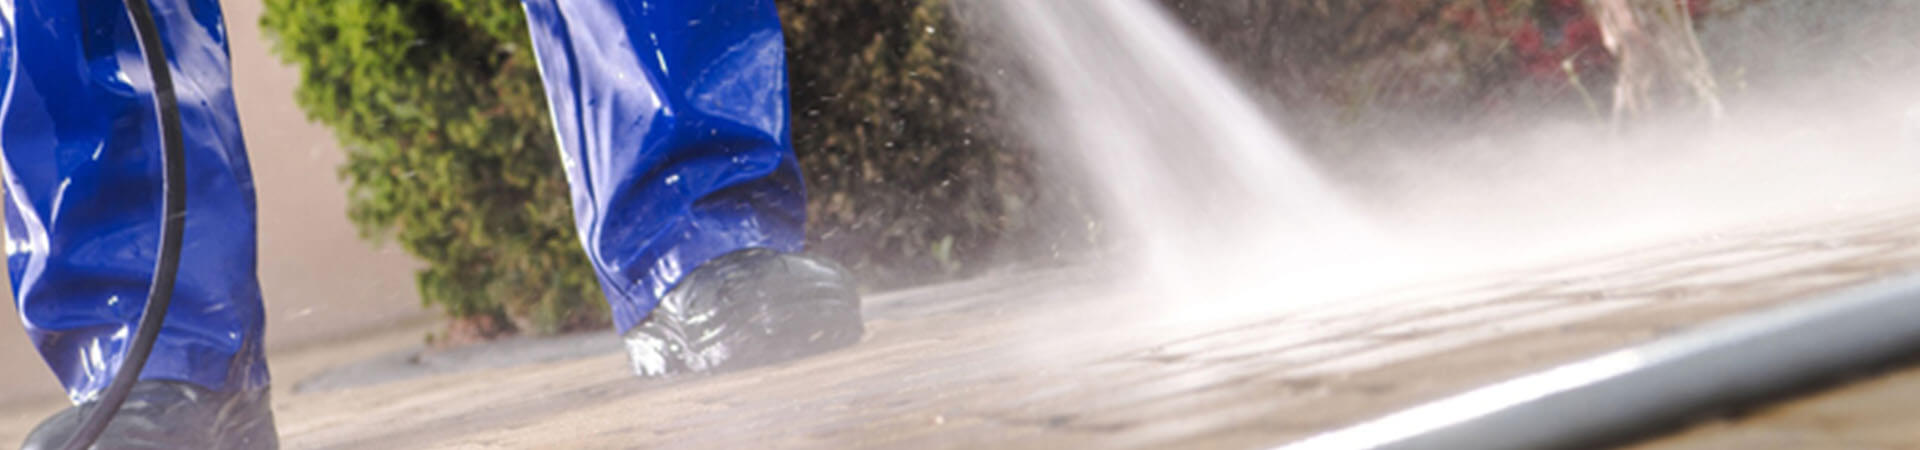 Littleton Window Cleaning Services, Power Washing Services and Pressure Washing Services